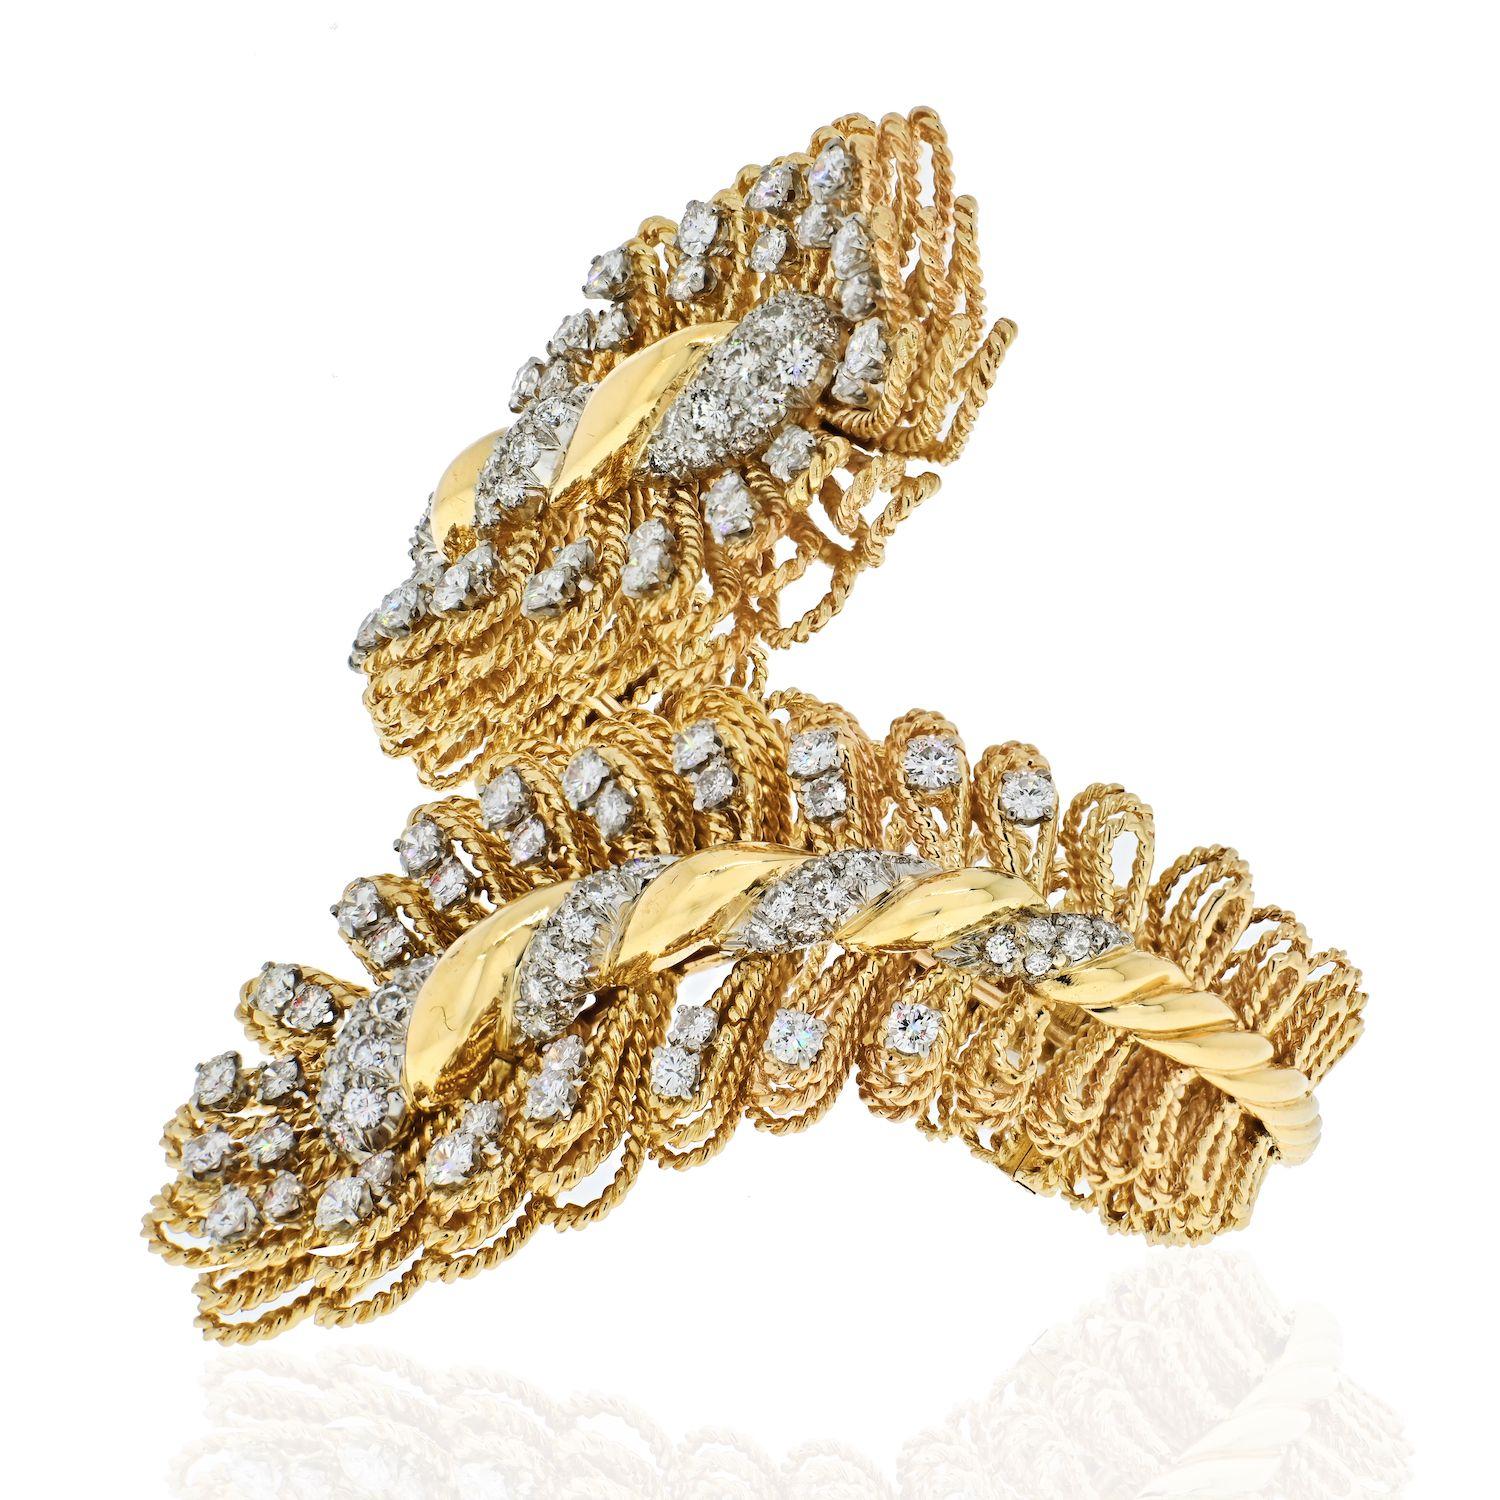 Beautiful vintage crossover David Webb cuff bracelet made in 18K Yellow Gold and Platinum. Hinged closure, perfect for wrist sizes from 6.25 to 6.75 inches. 
Round cut diamonds approx. 10 carats. 
Quality F-G color, VS-SI clarity. 
